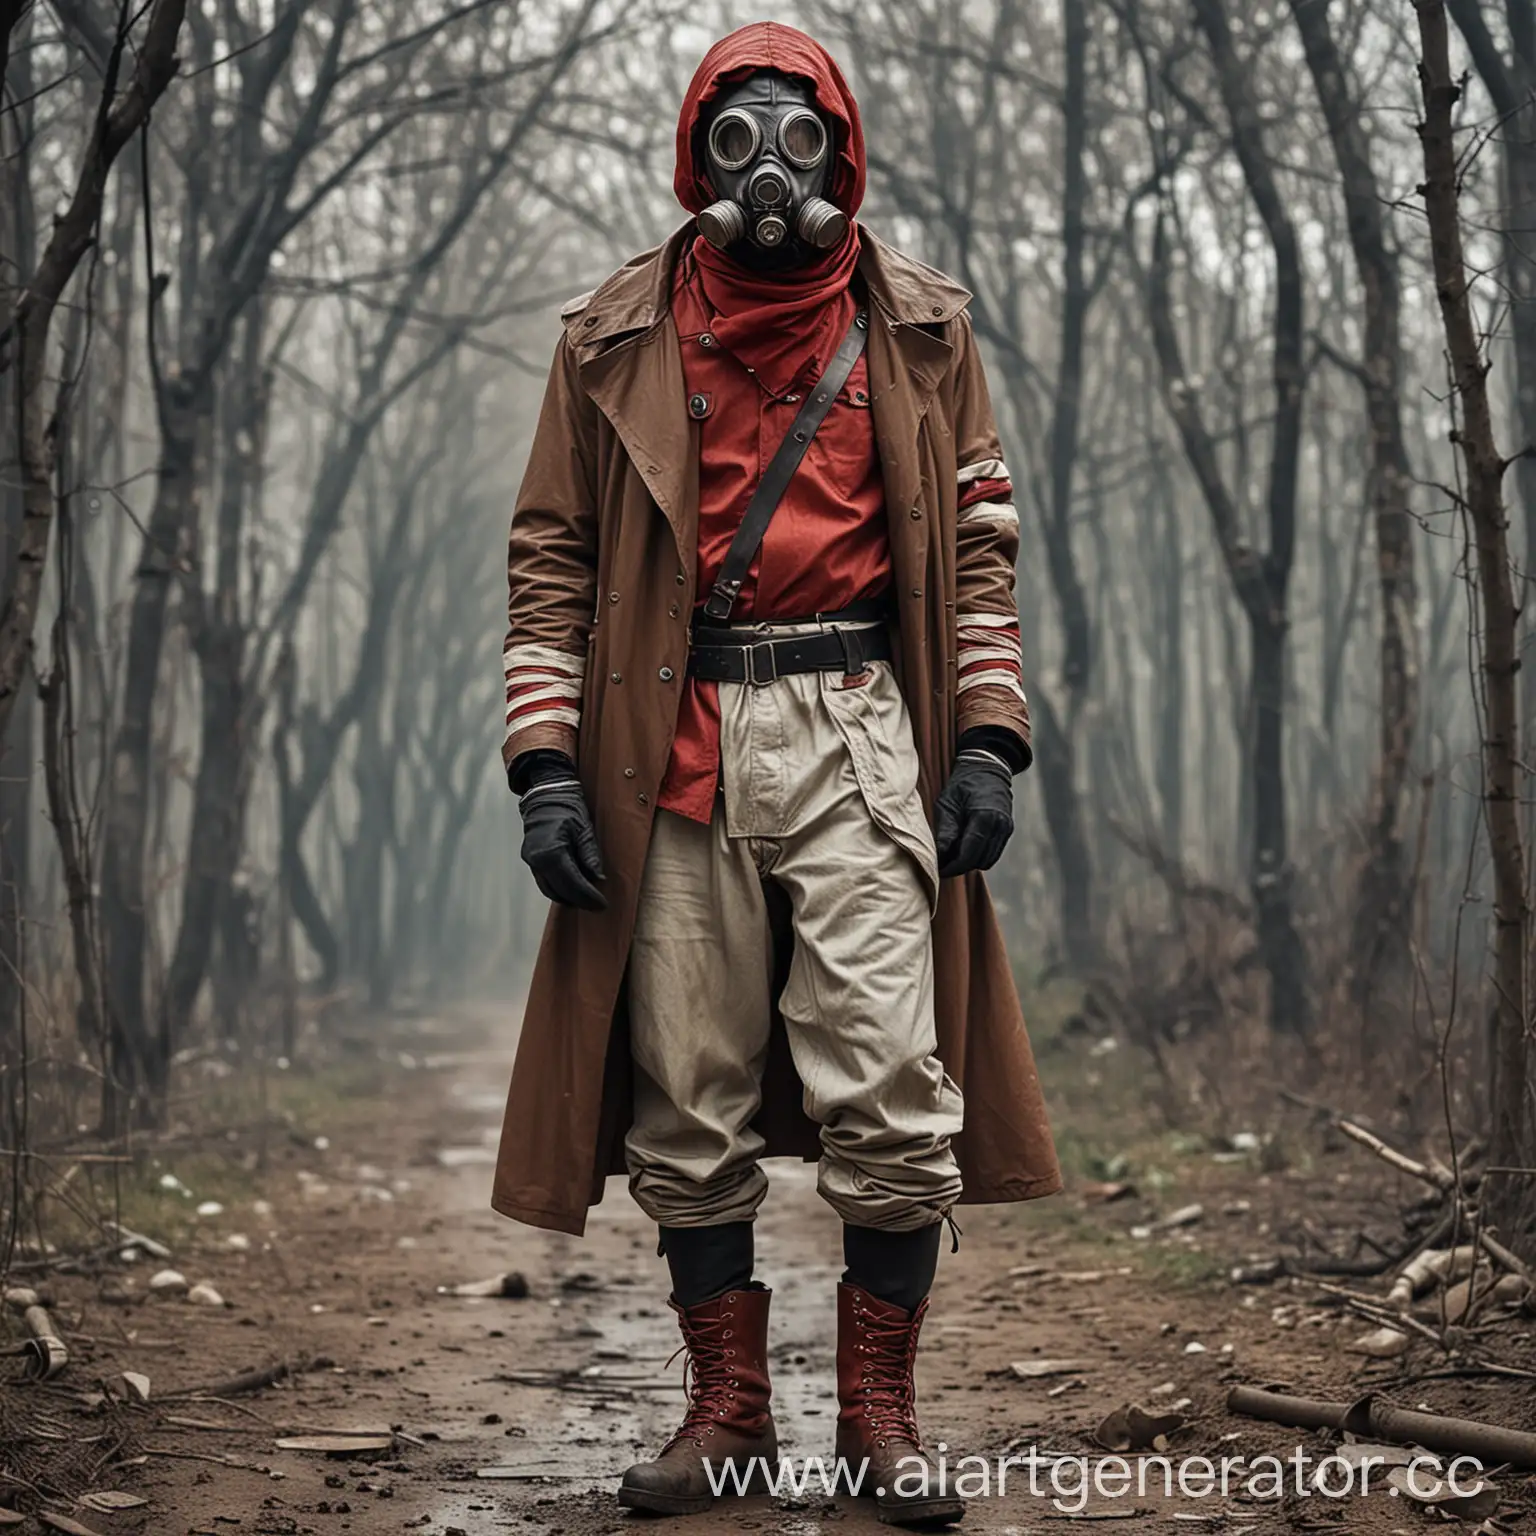 A war rebel in the hood wearing a soviet gas mask, brown long leather raincoat, white and red with lines bandage on the shoulder, grey pants, boots